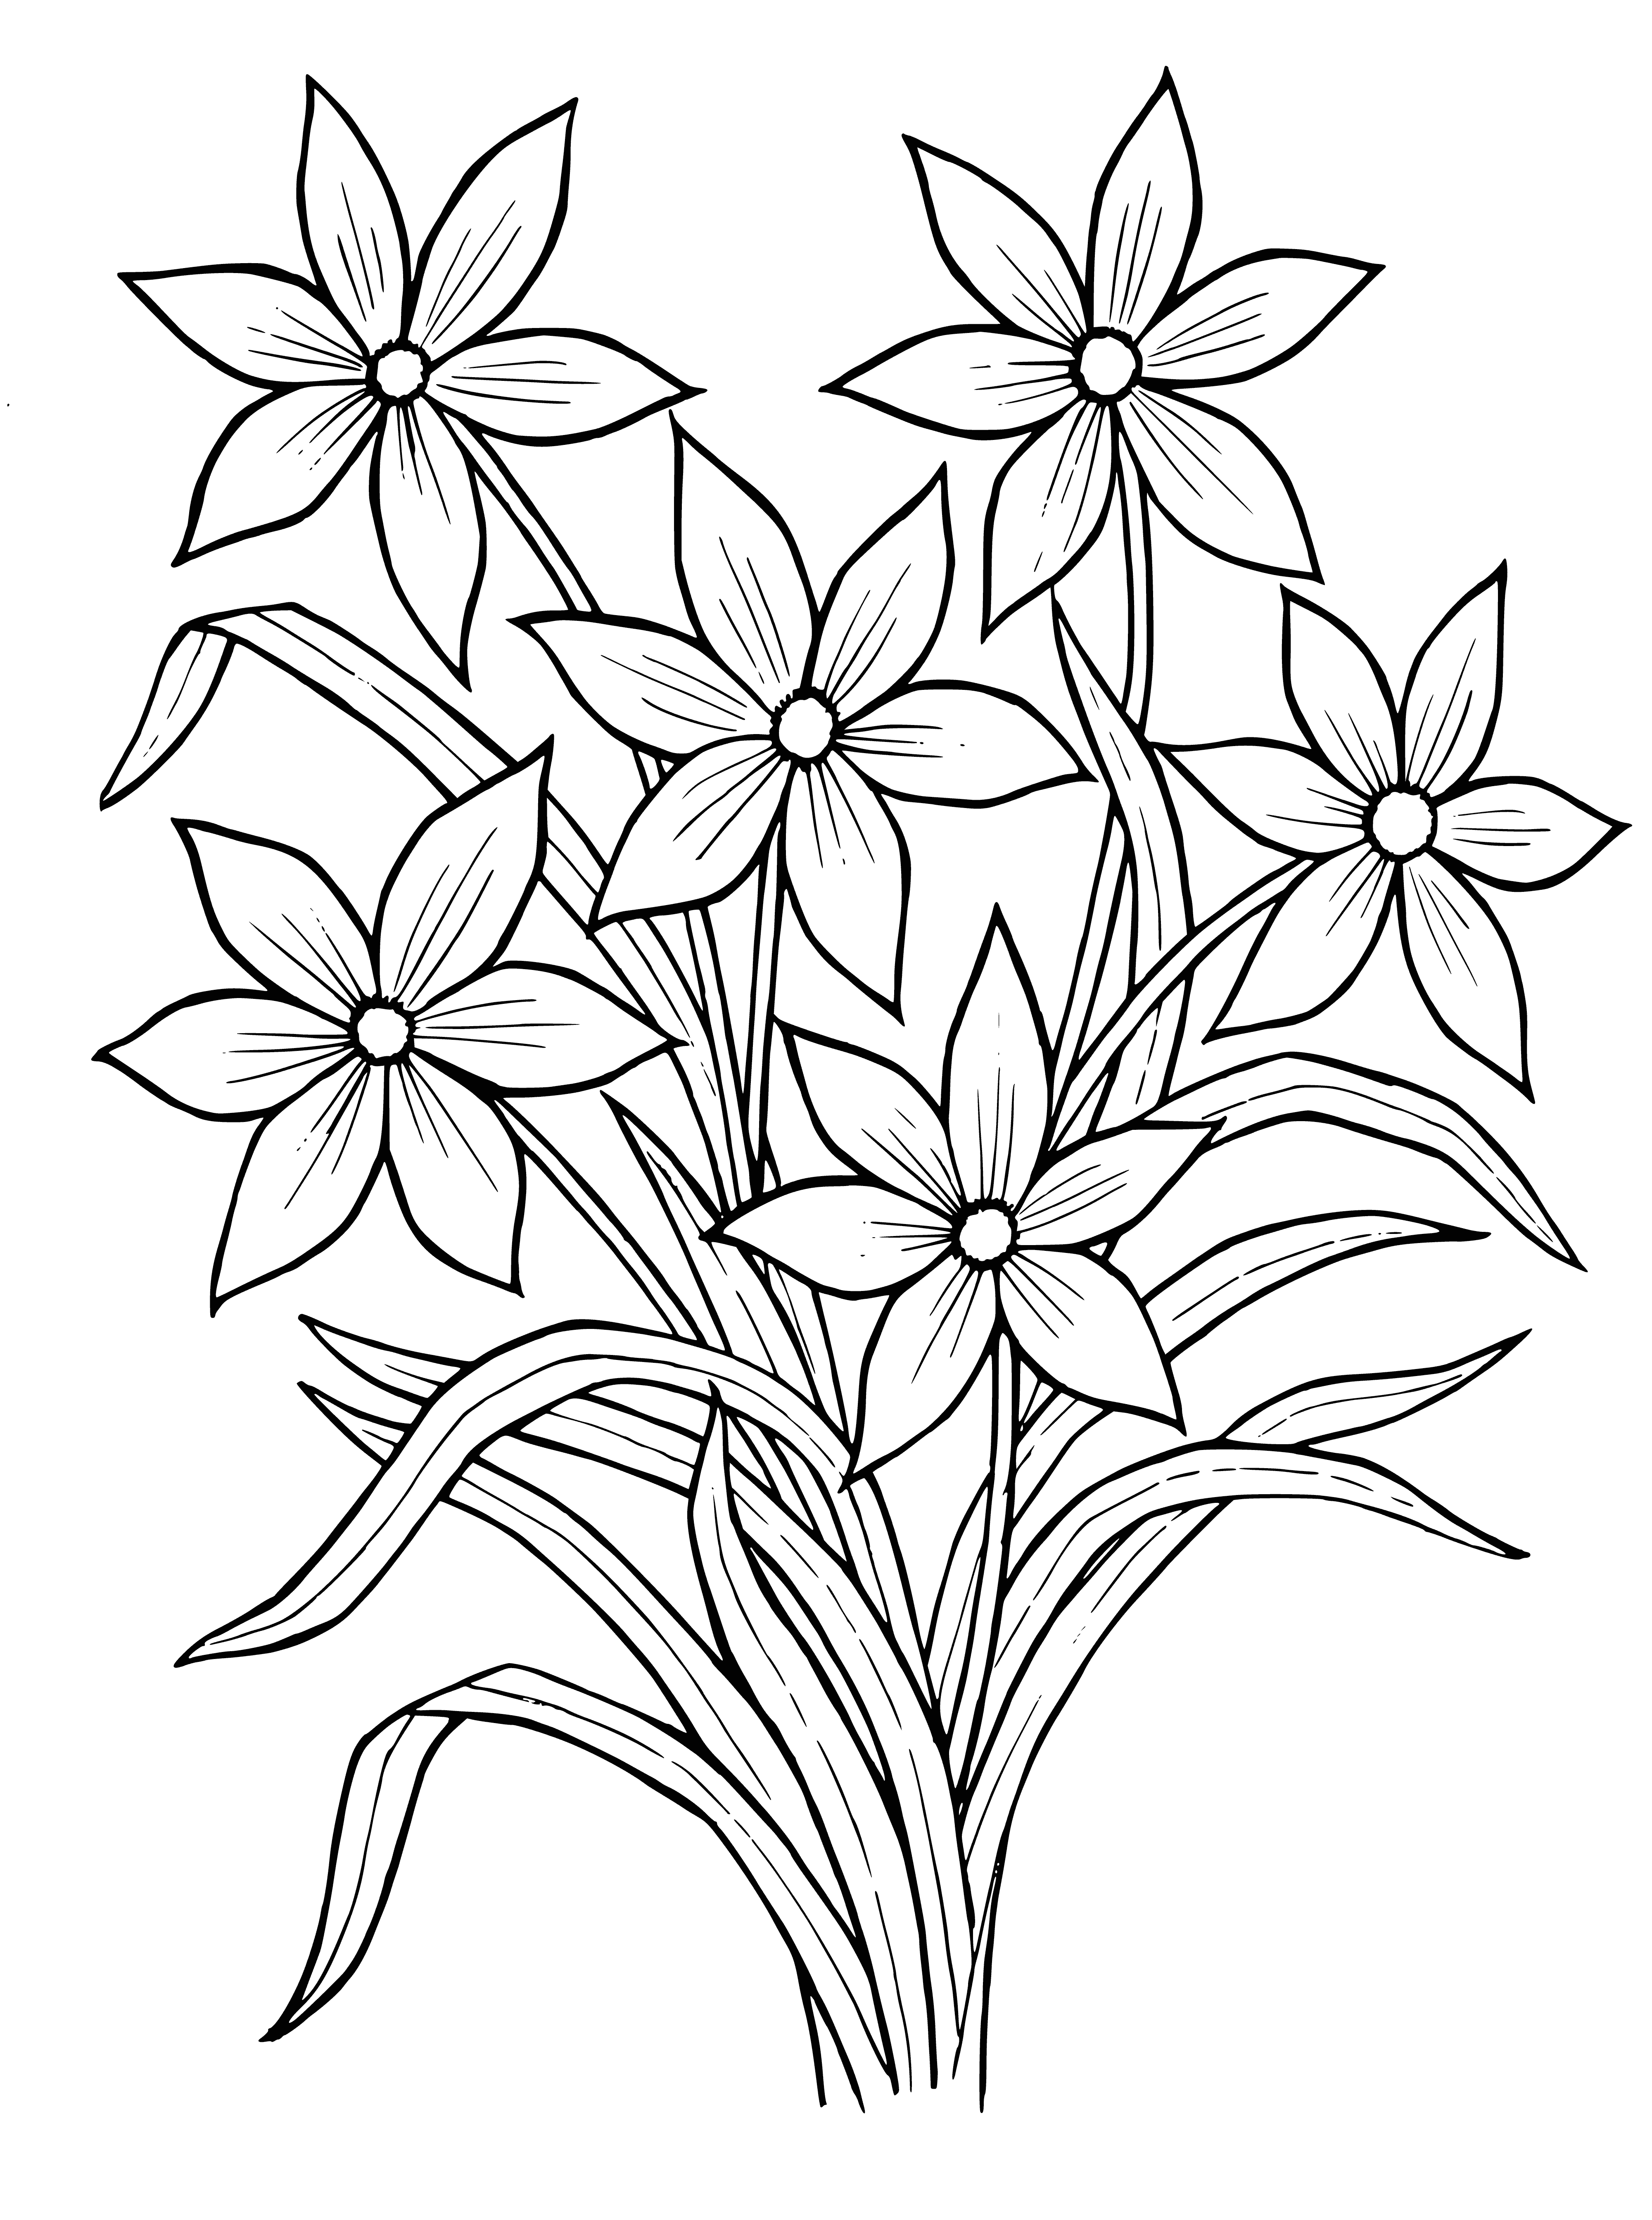 coloring page: Field of white narcissus blooming with yellow centers in a lush green landscape.